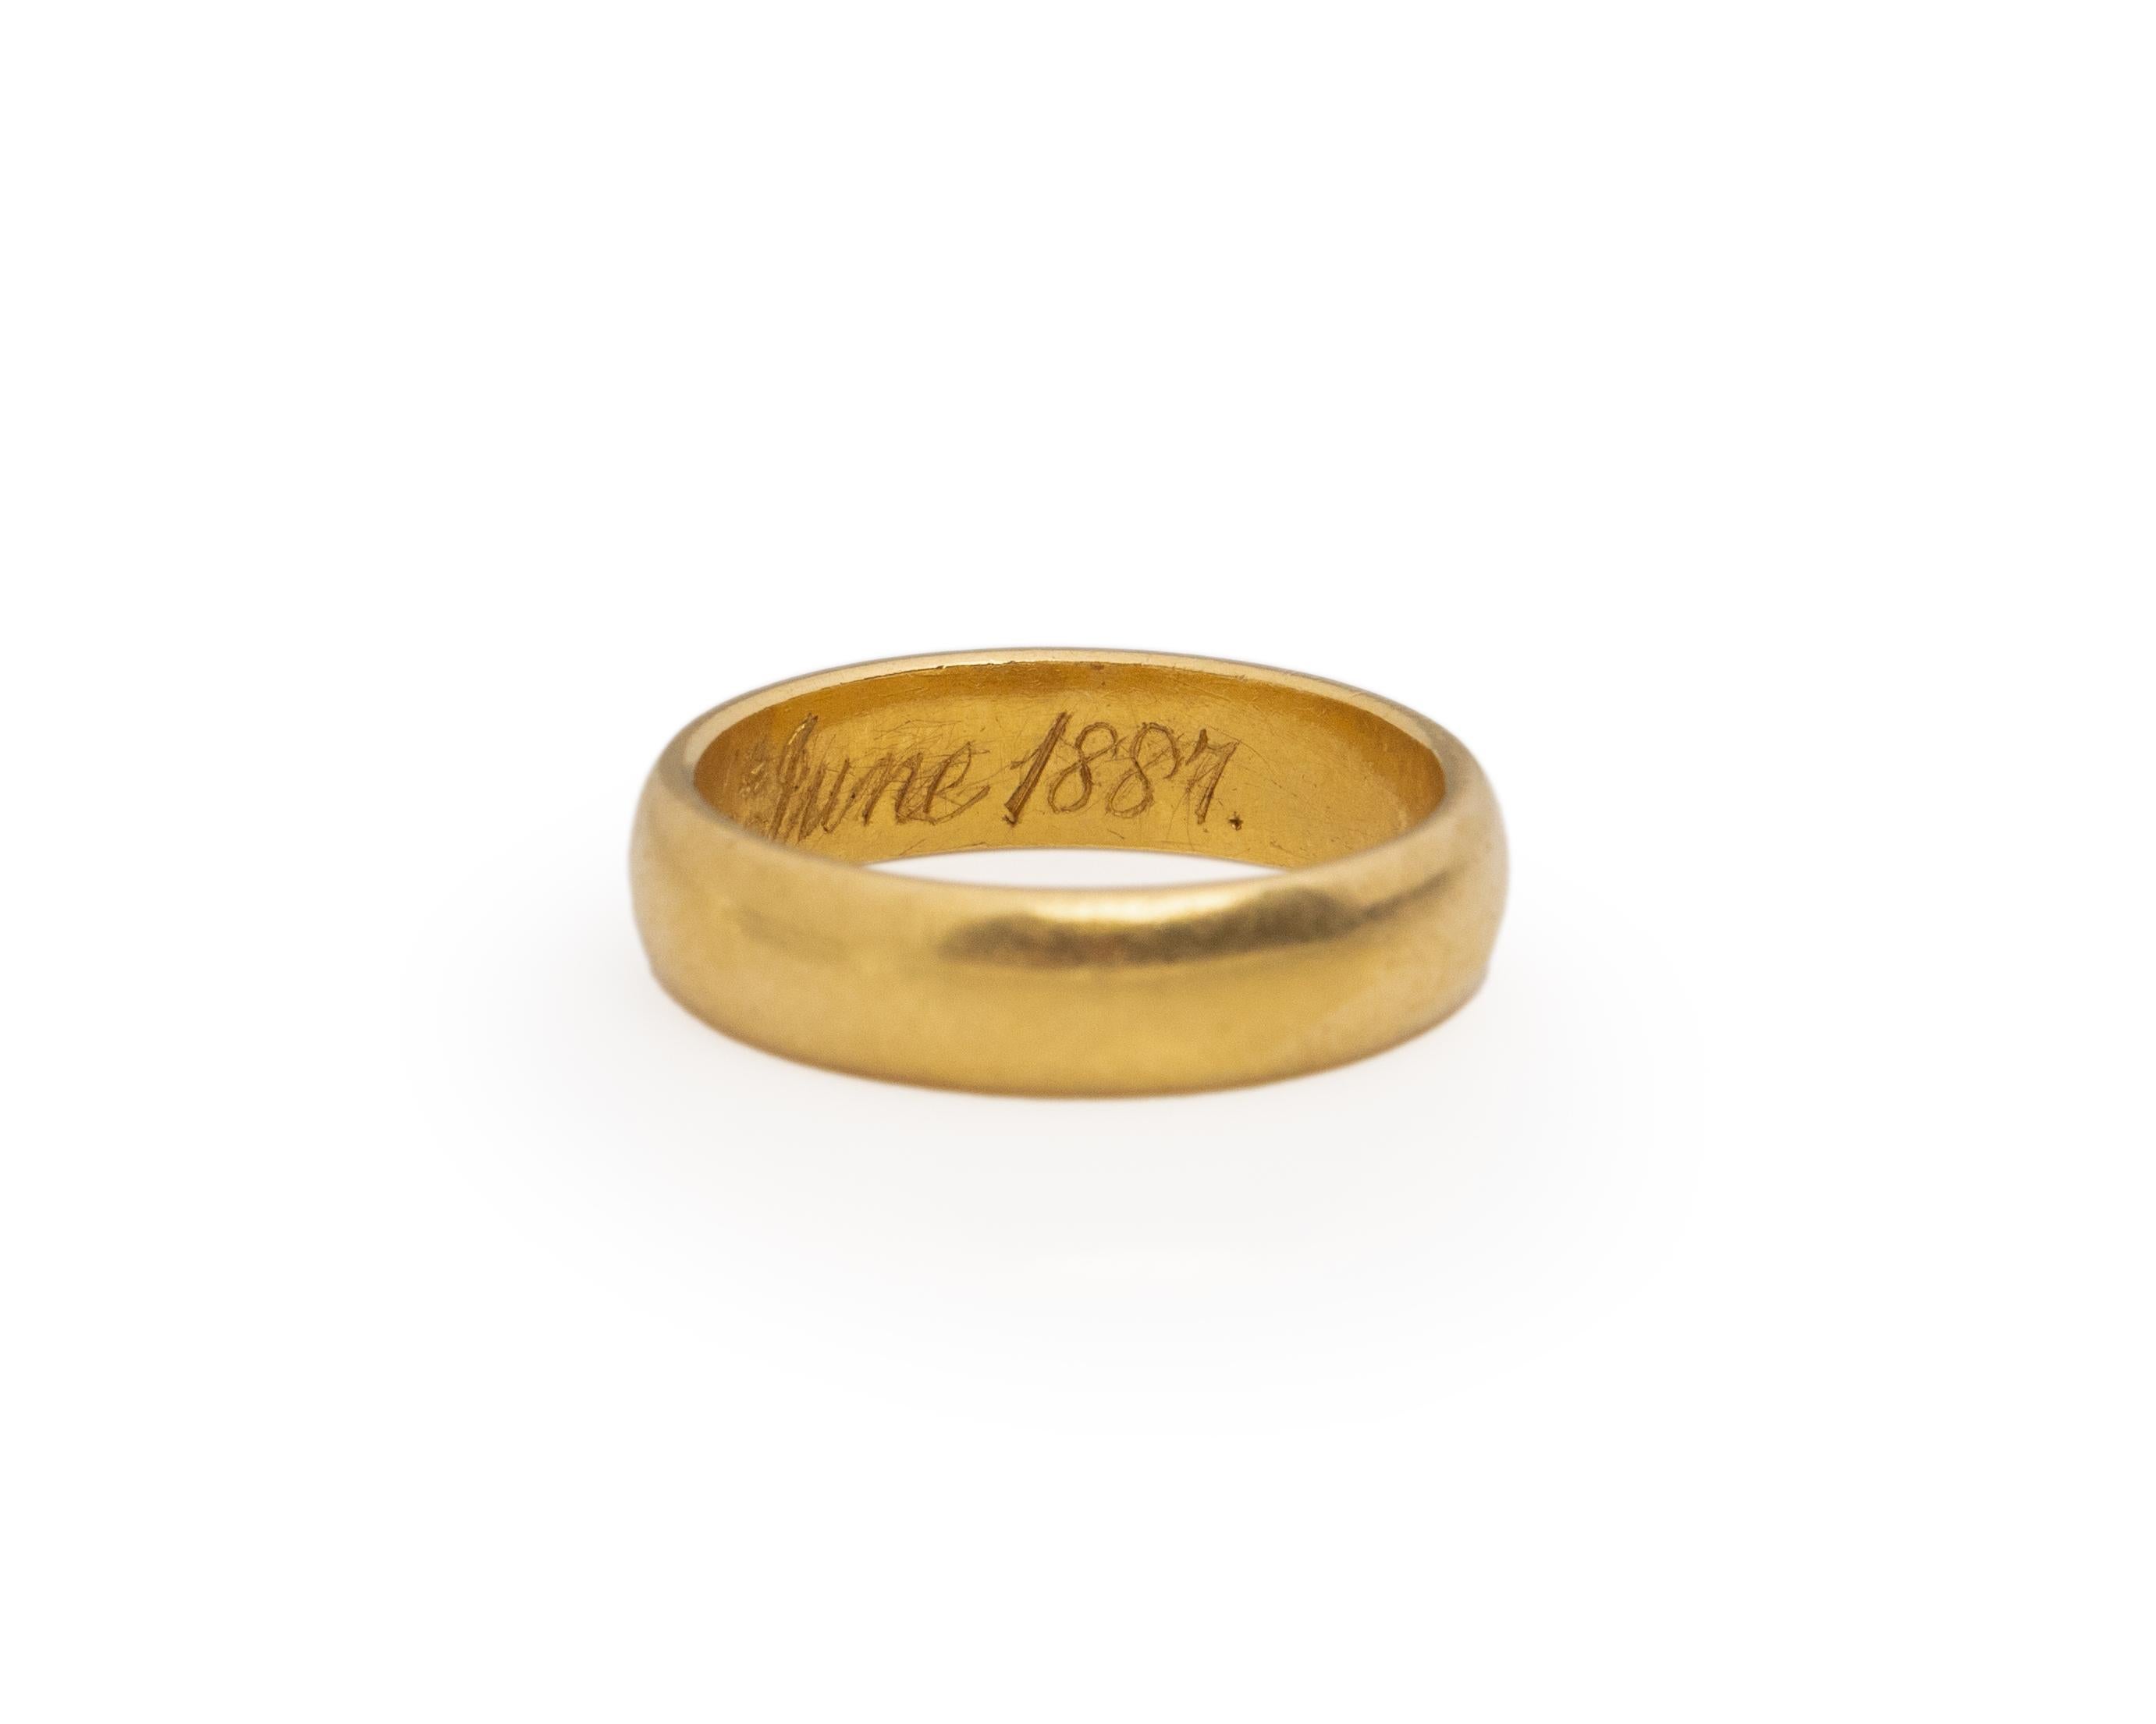 Ring Size: 6
Metal Type: 22K Yellow Gold [Hallmarked, and Tested]
Weight: 6.0 grams

Finger to Top of Stone Measurement: 1.5mm
Condition: Excellent